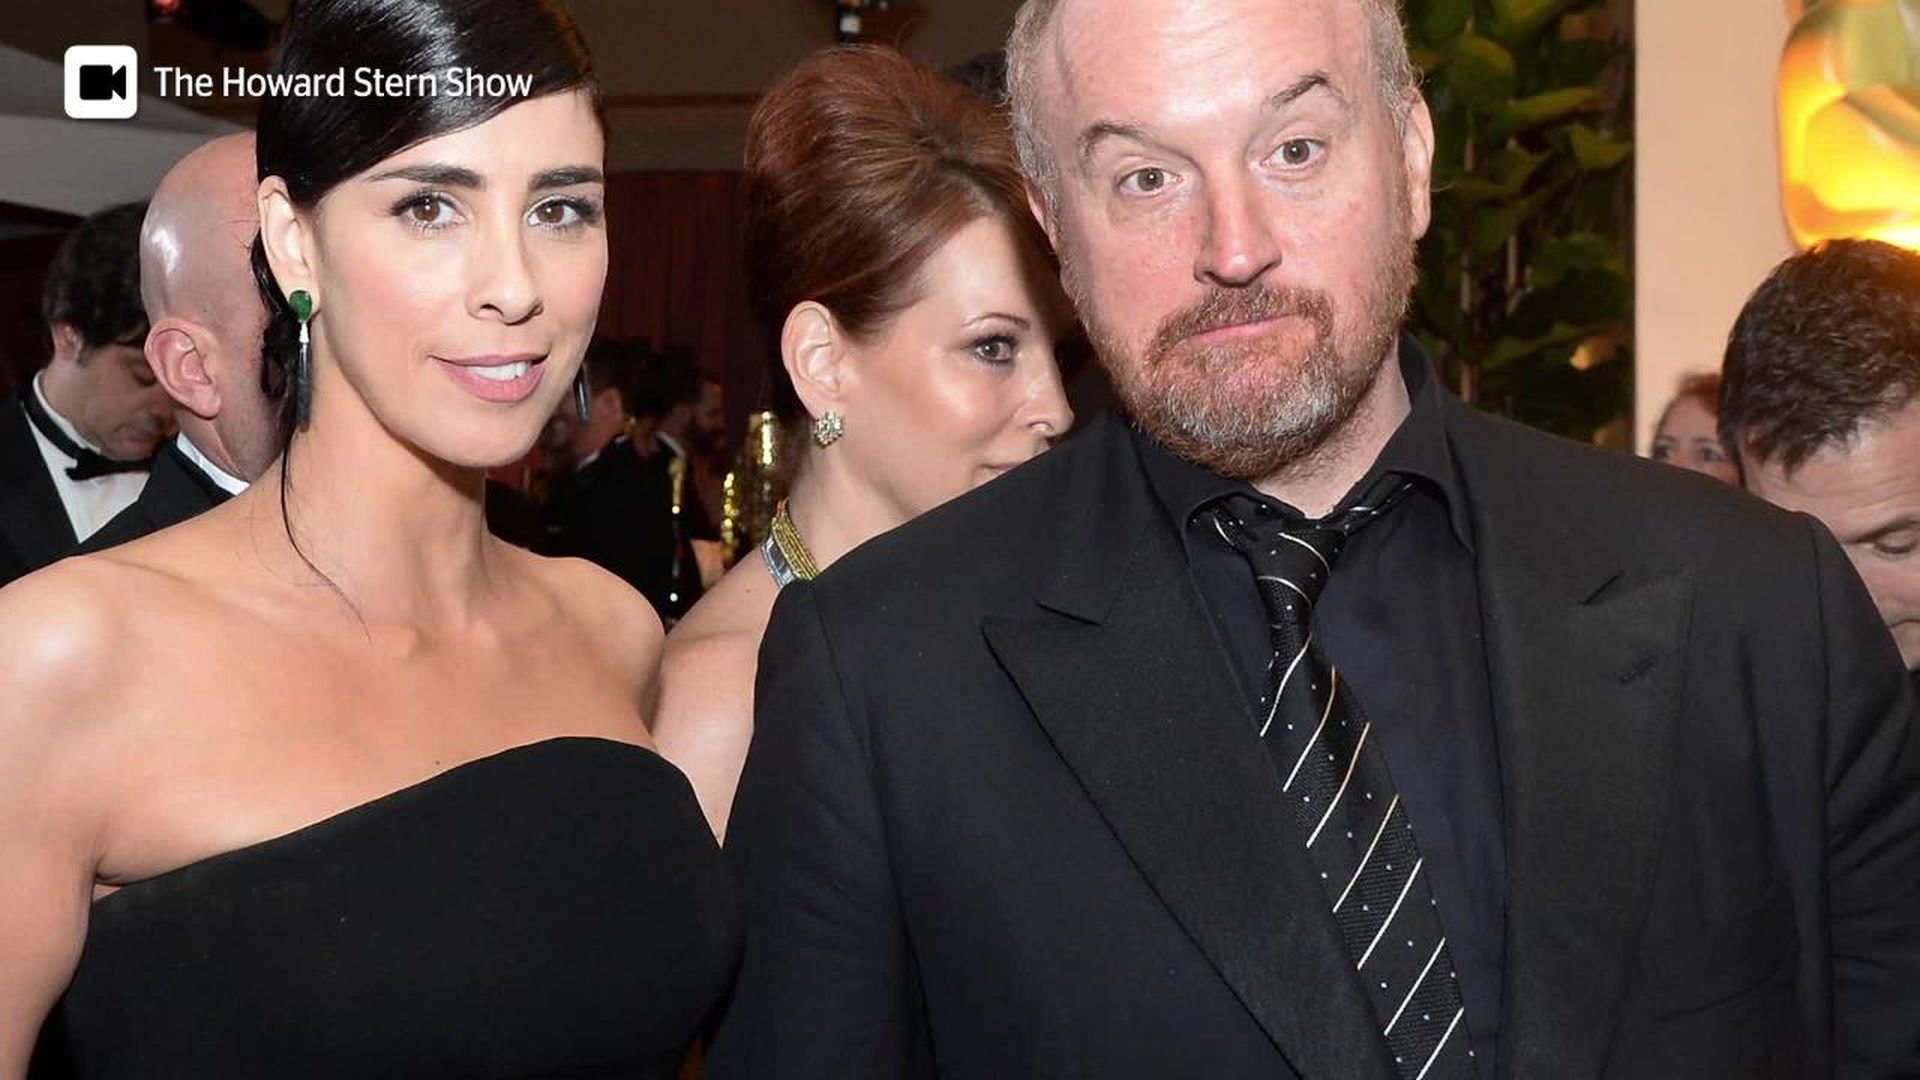 Louis CK wins Grammy for Best Comedy Album: Really, Academy? - GoldDerby